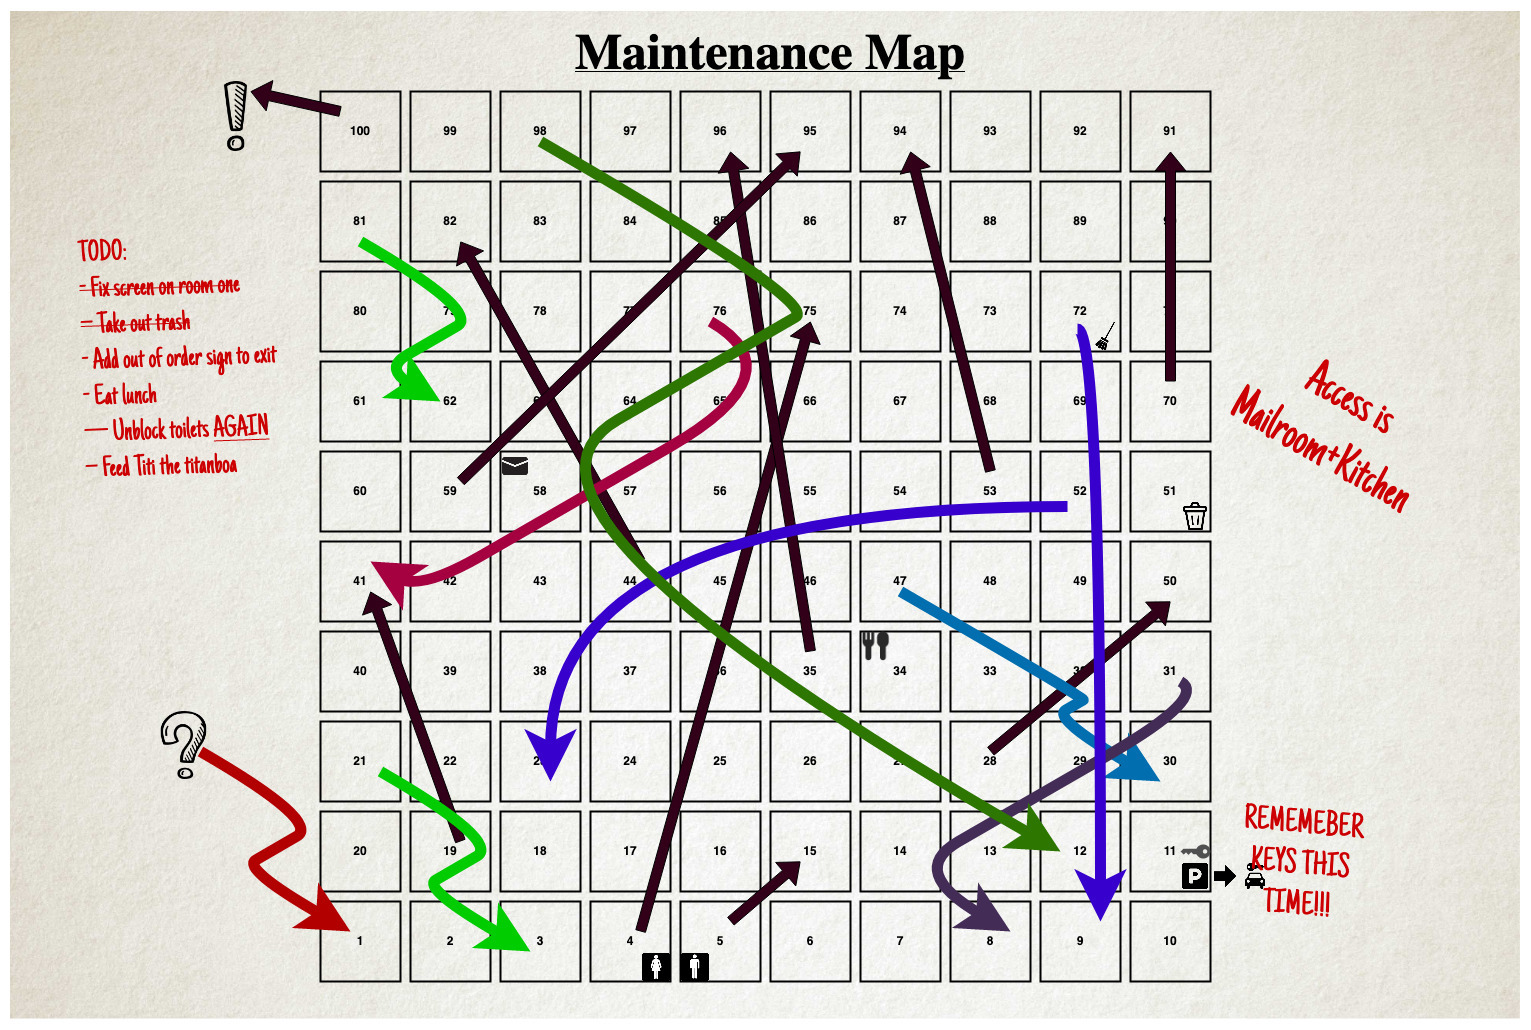 snakes_and_ladders.jpg